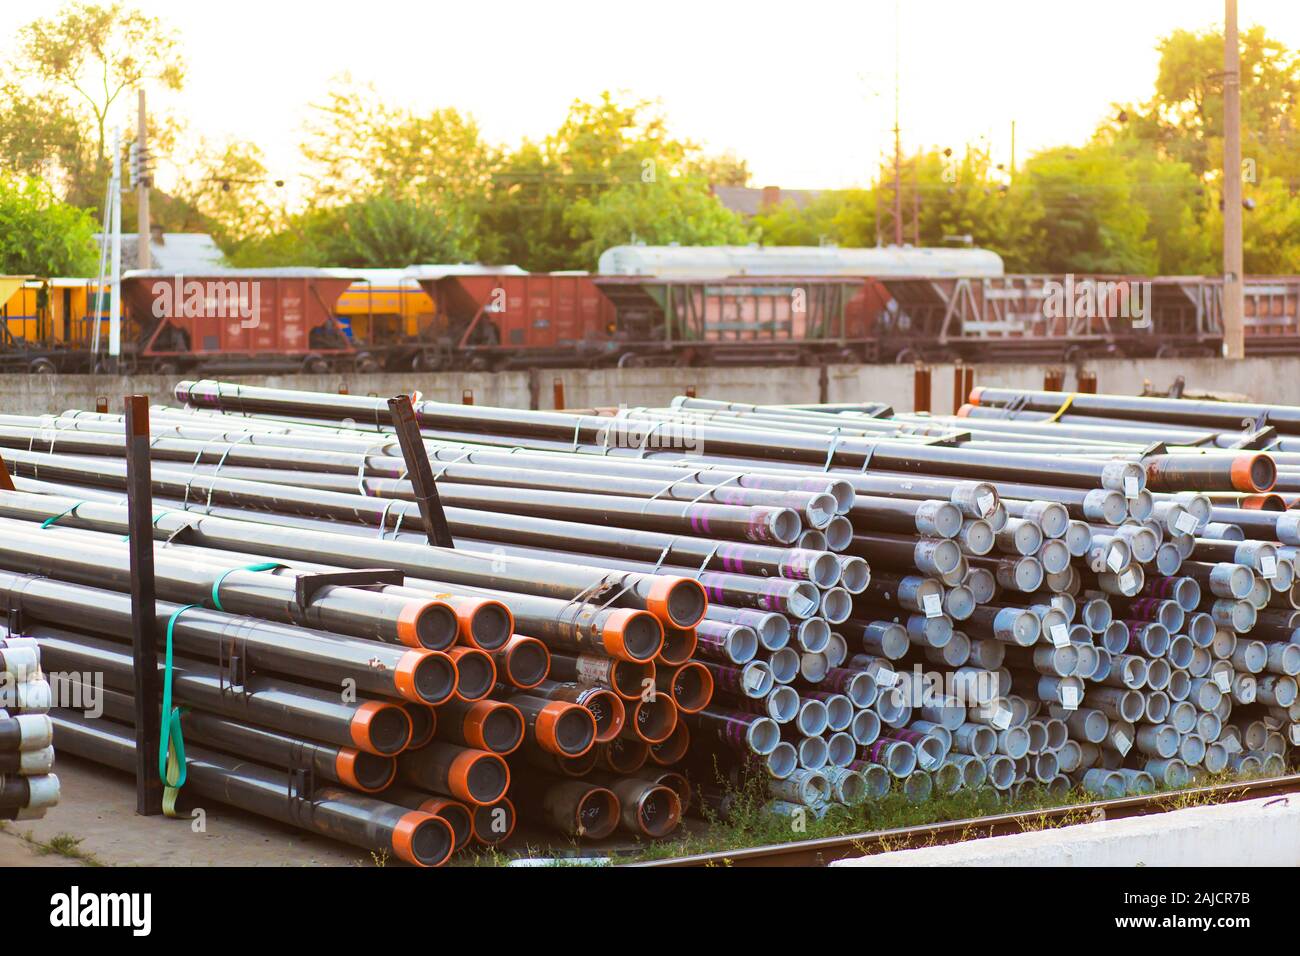 Metal rolling. Pipes folded in a railway warehouse are being prepared for shipment. The concept of metalworking and heavy industry. Stock Photo